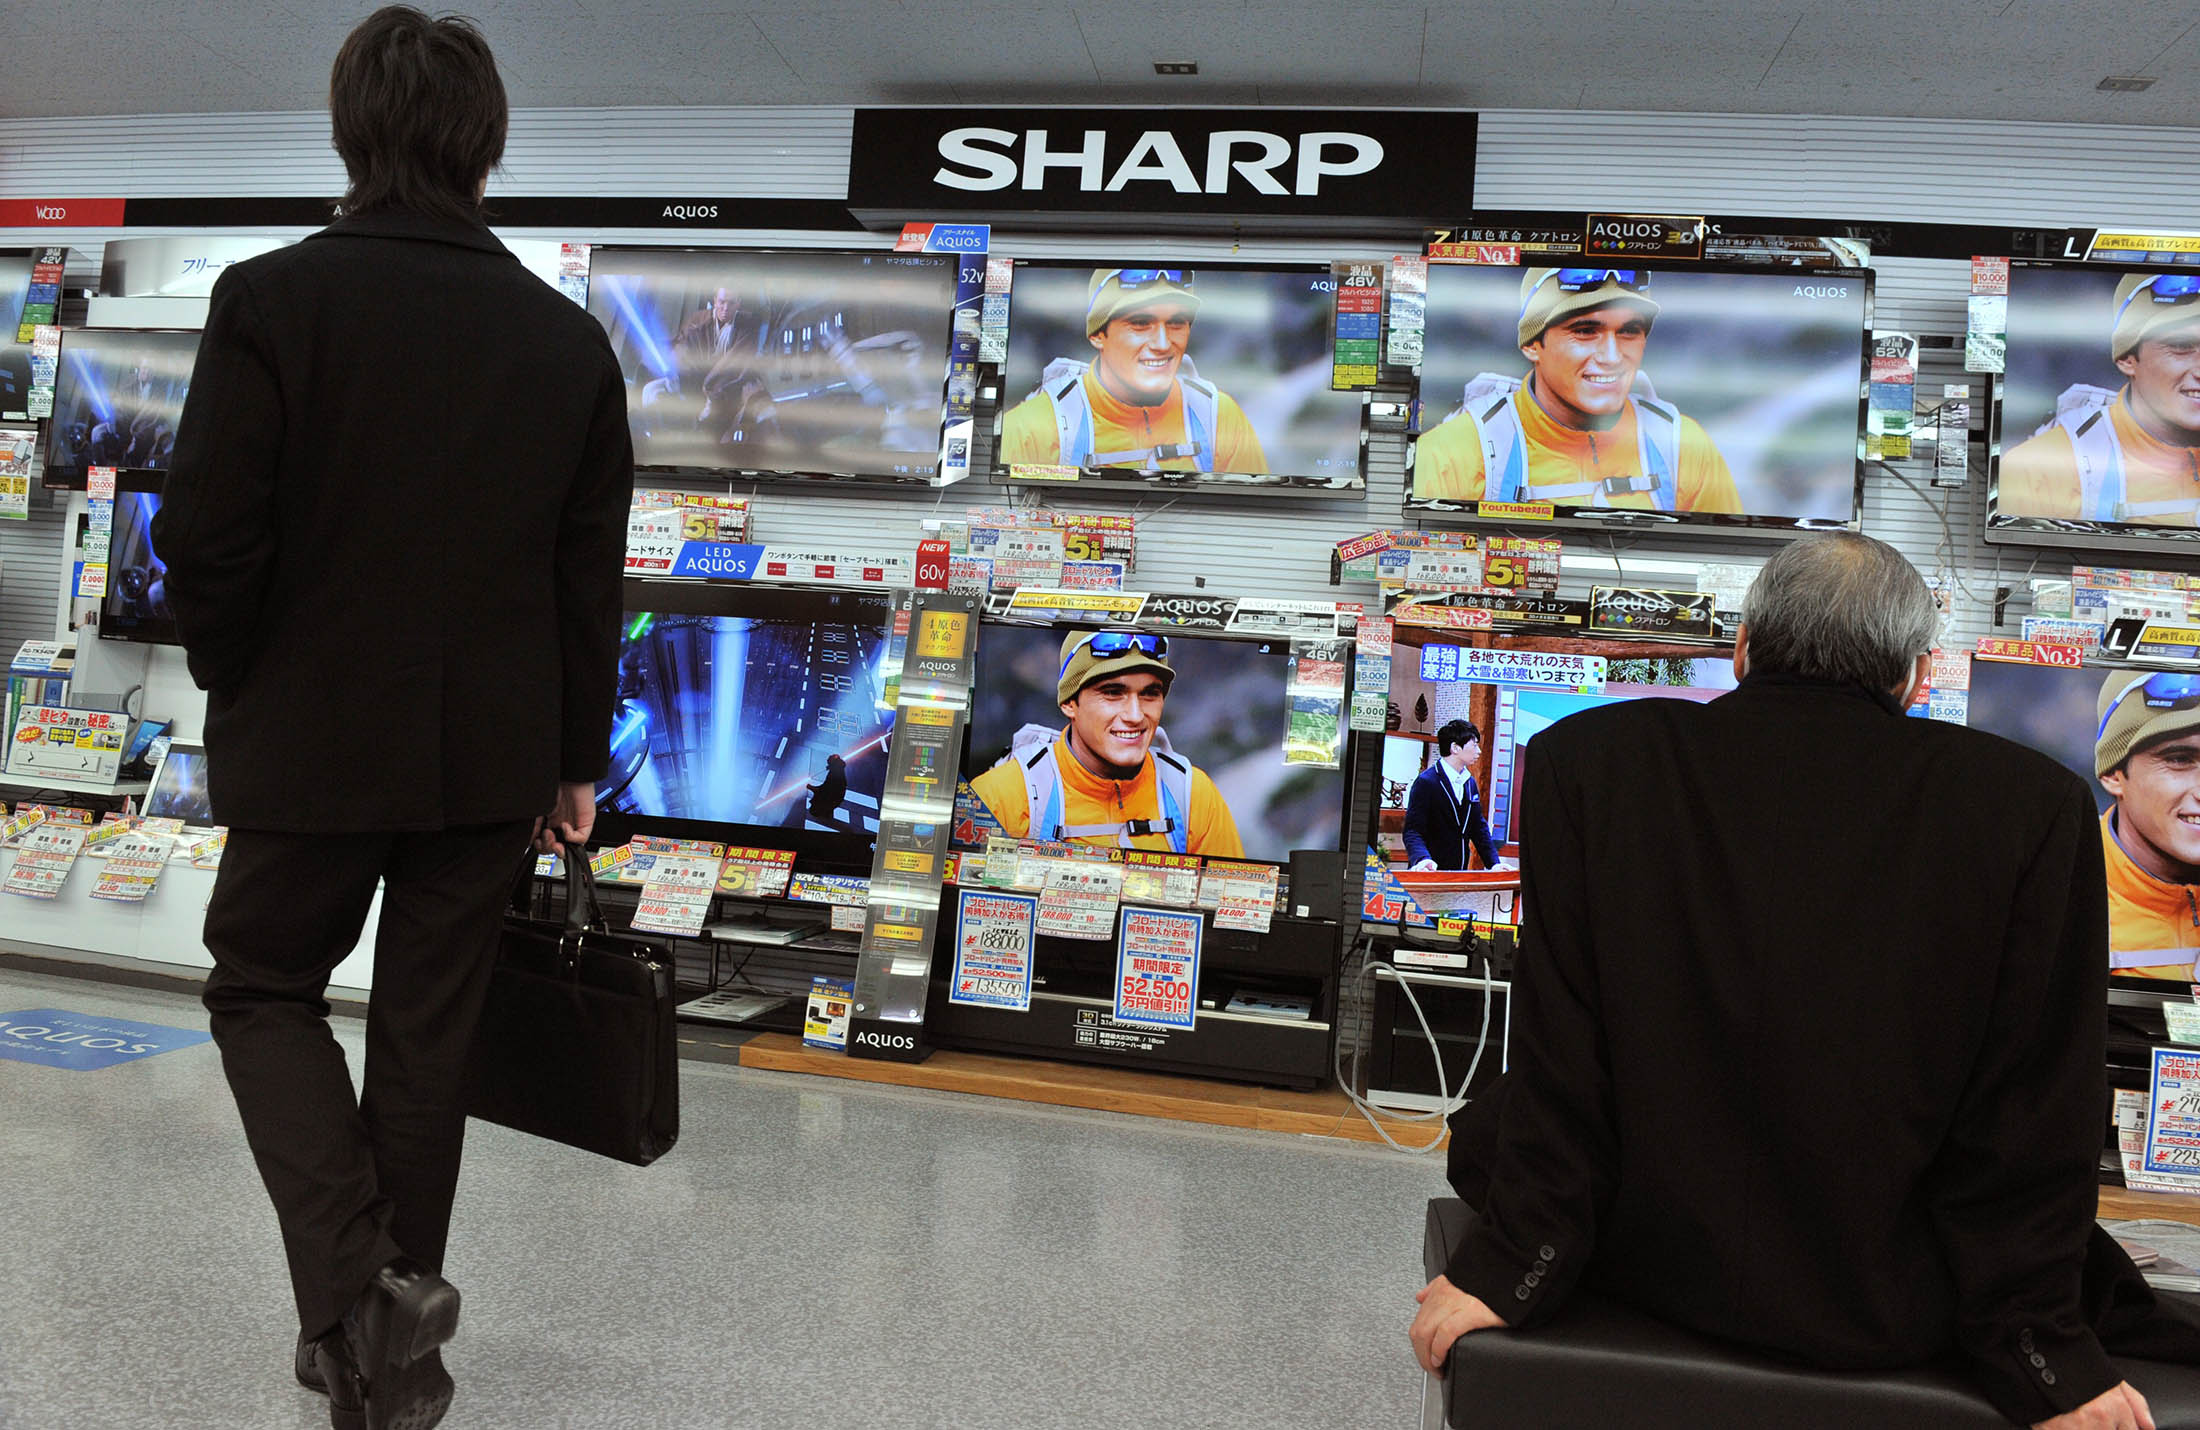 (FILES) This file photo taken on February 1, 2012 shows customers watching televisions under a Sharp logo at an electrical shop in Tokyo. Shares in Japan's Sharp dived almost 30 percent to their lowest level in nearly four decades on August 3, 2012, after the consumer electronics giant warned its annual loss would be bigger than first thought. AFP PHOTO / FILES / KAZUHIRO NOGI (Photo credit should read KAZUHIRO NOGI/AFP/GettyImages)
